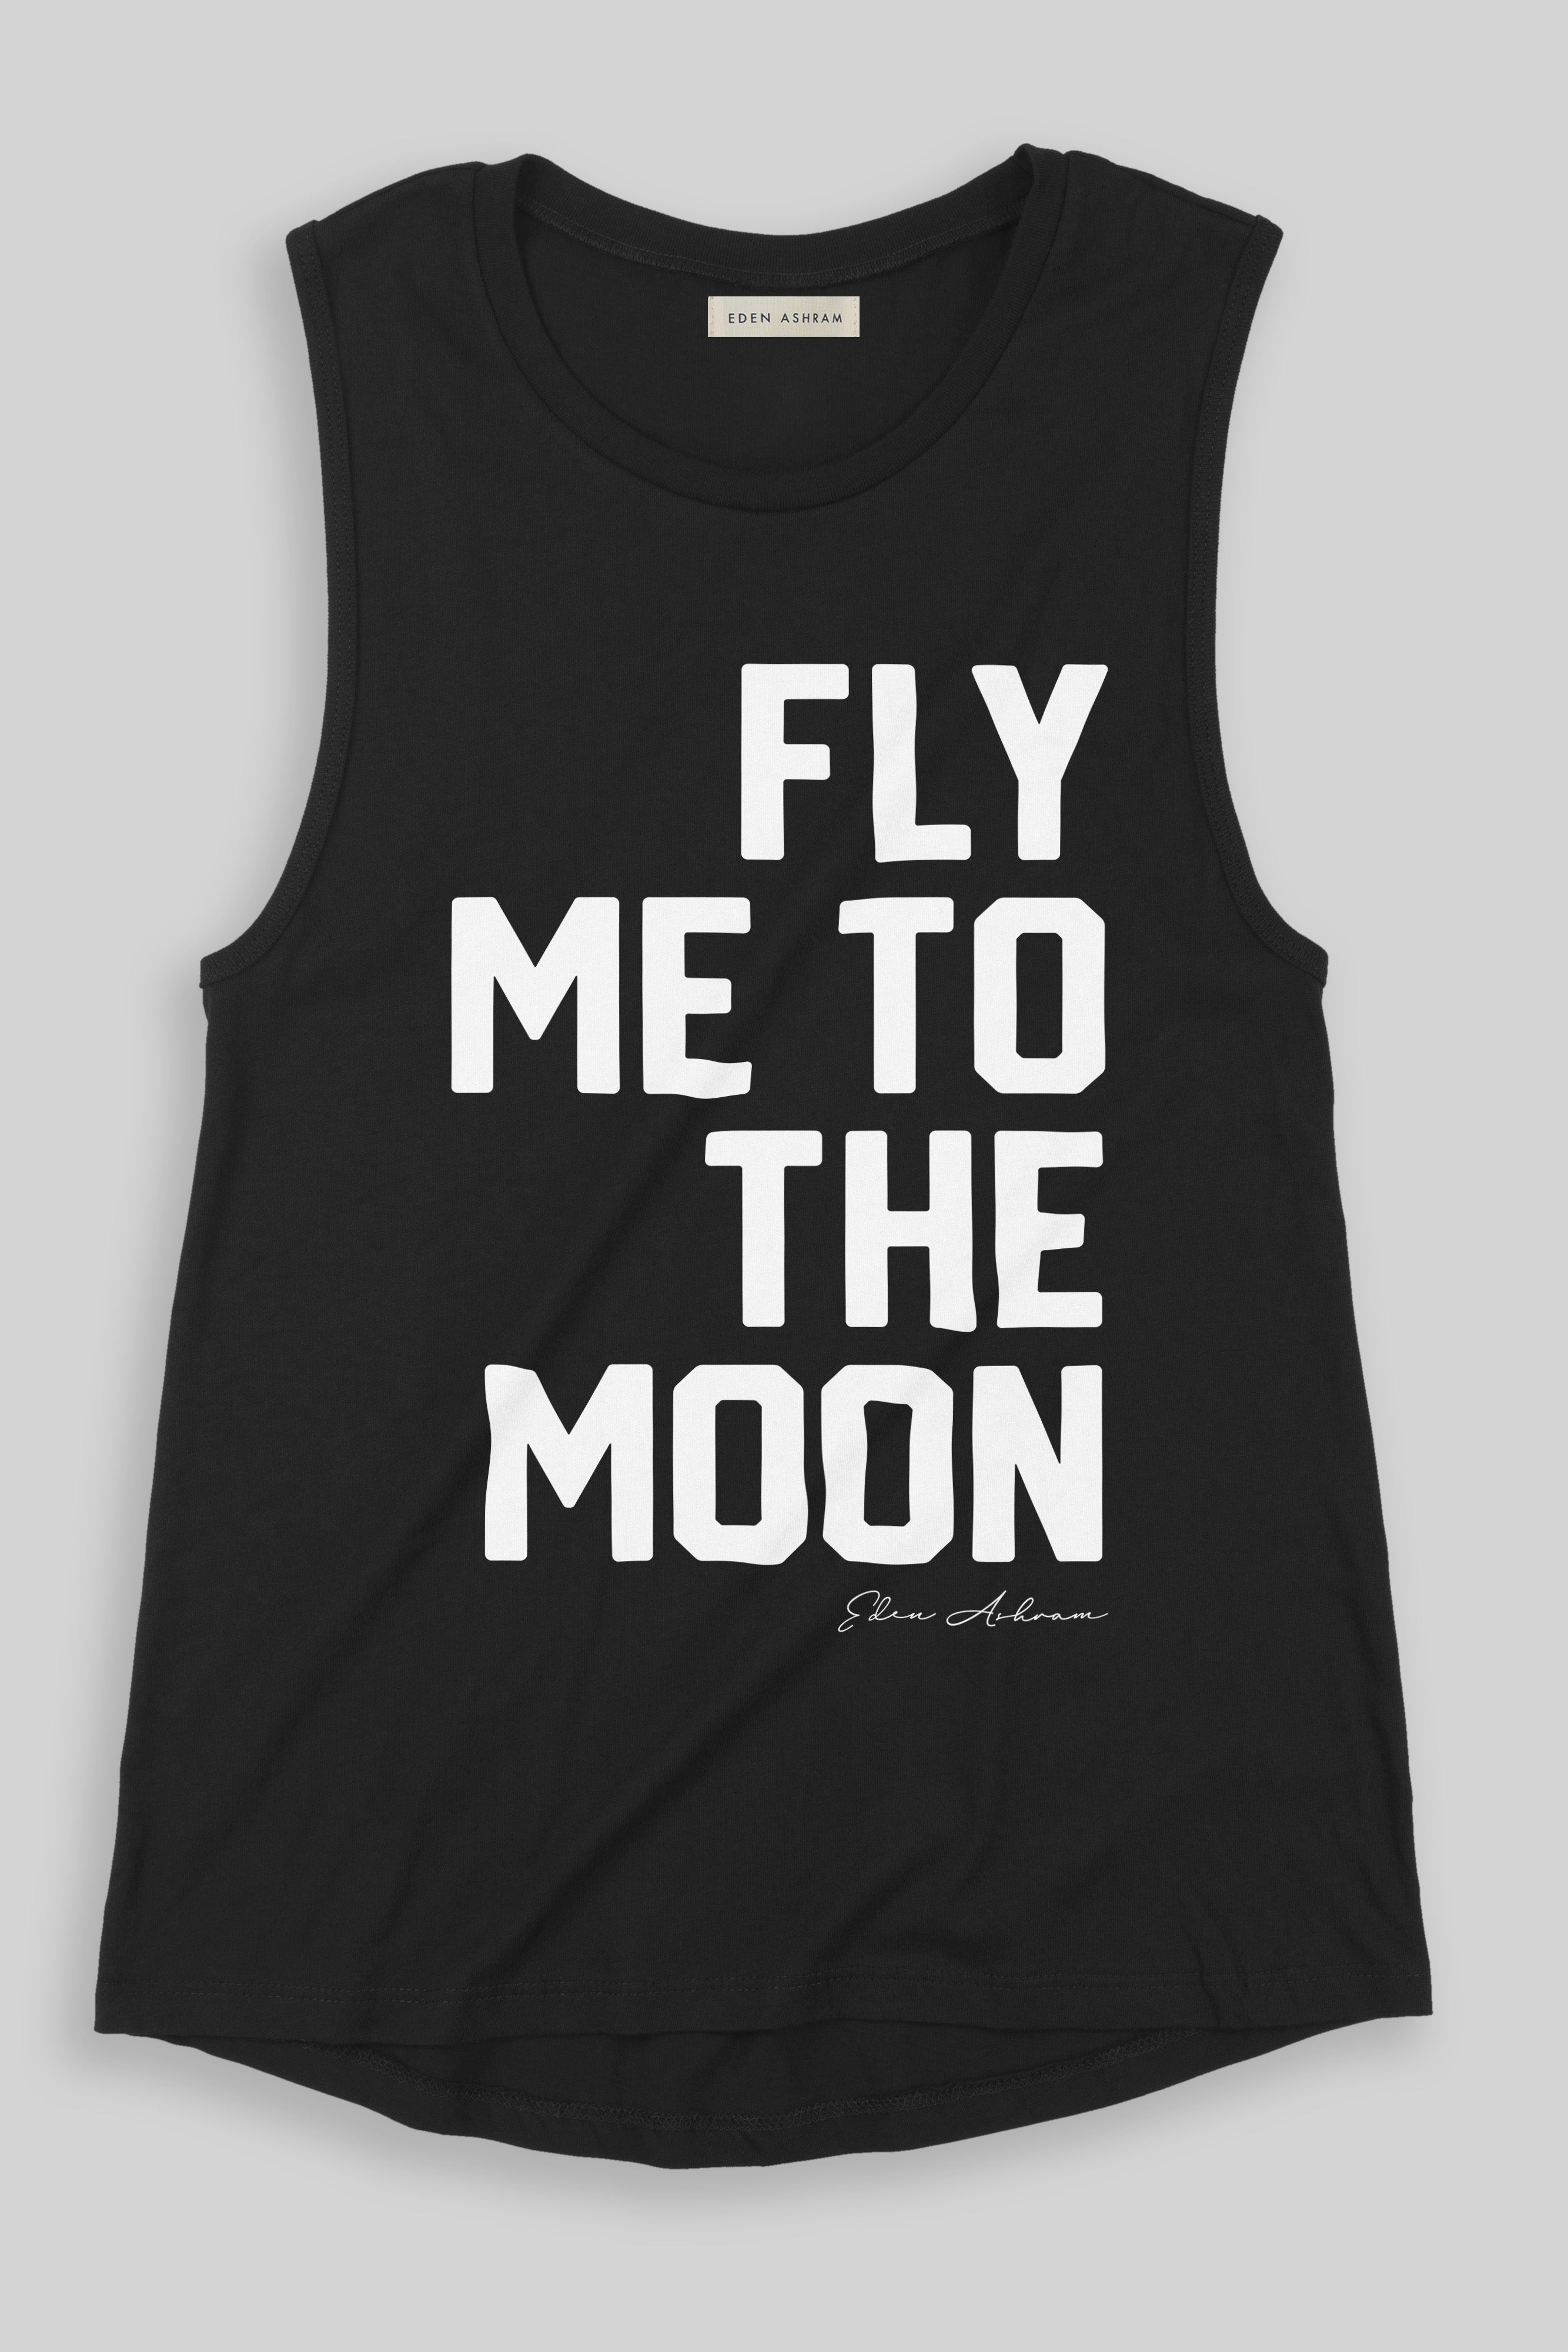 EDEN ASHRAM Fly Me To The Moon Premium Jersey Muscle Tank Black